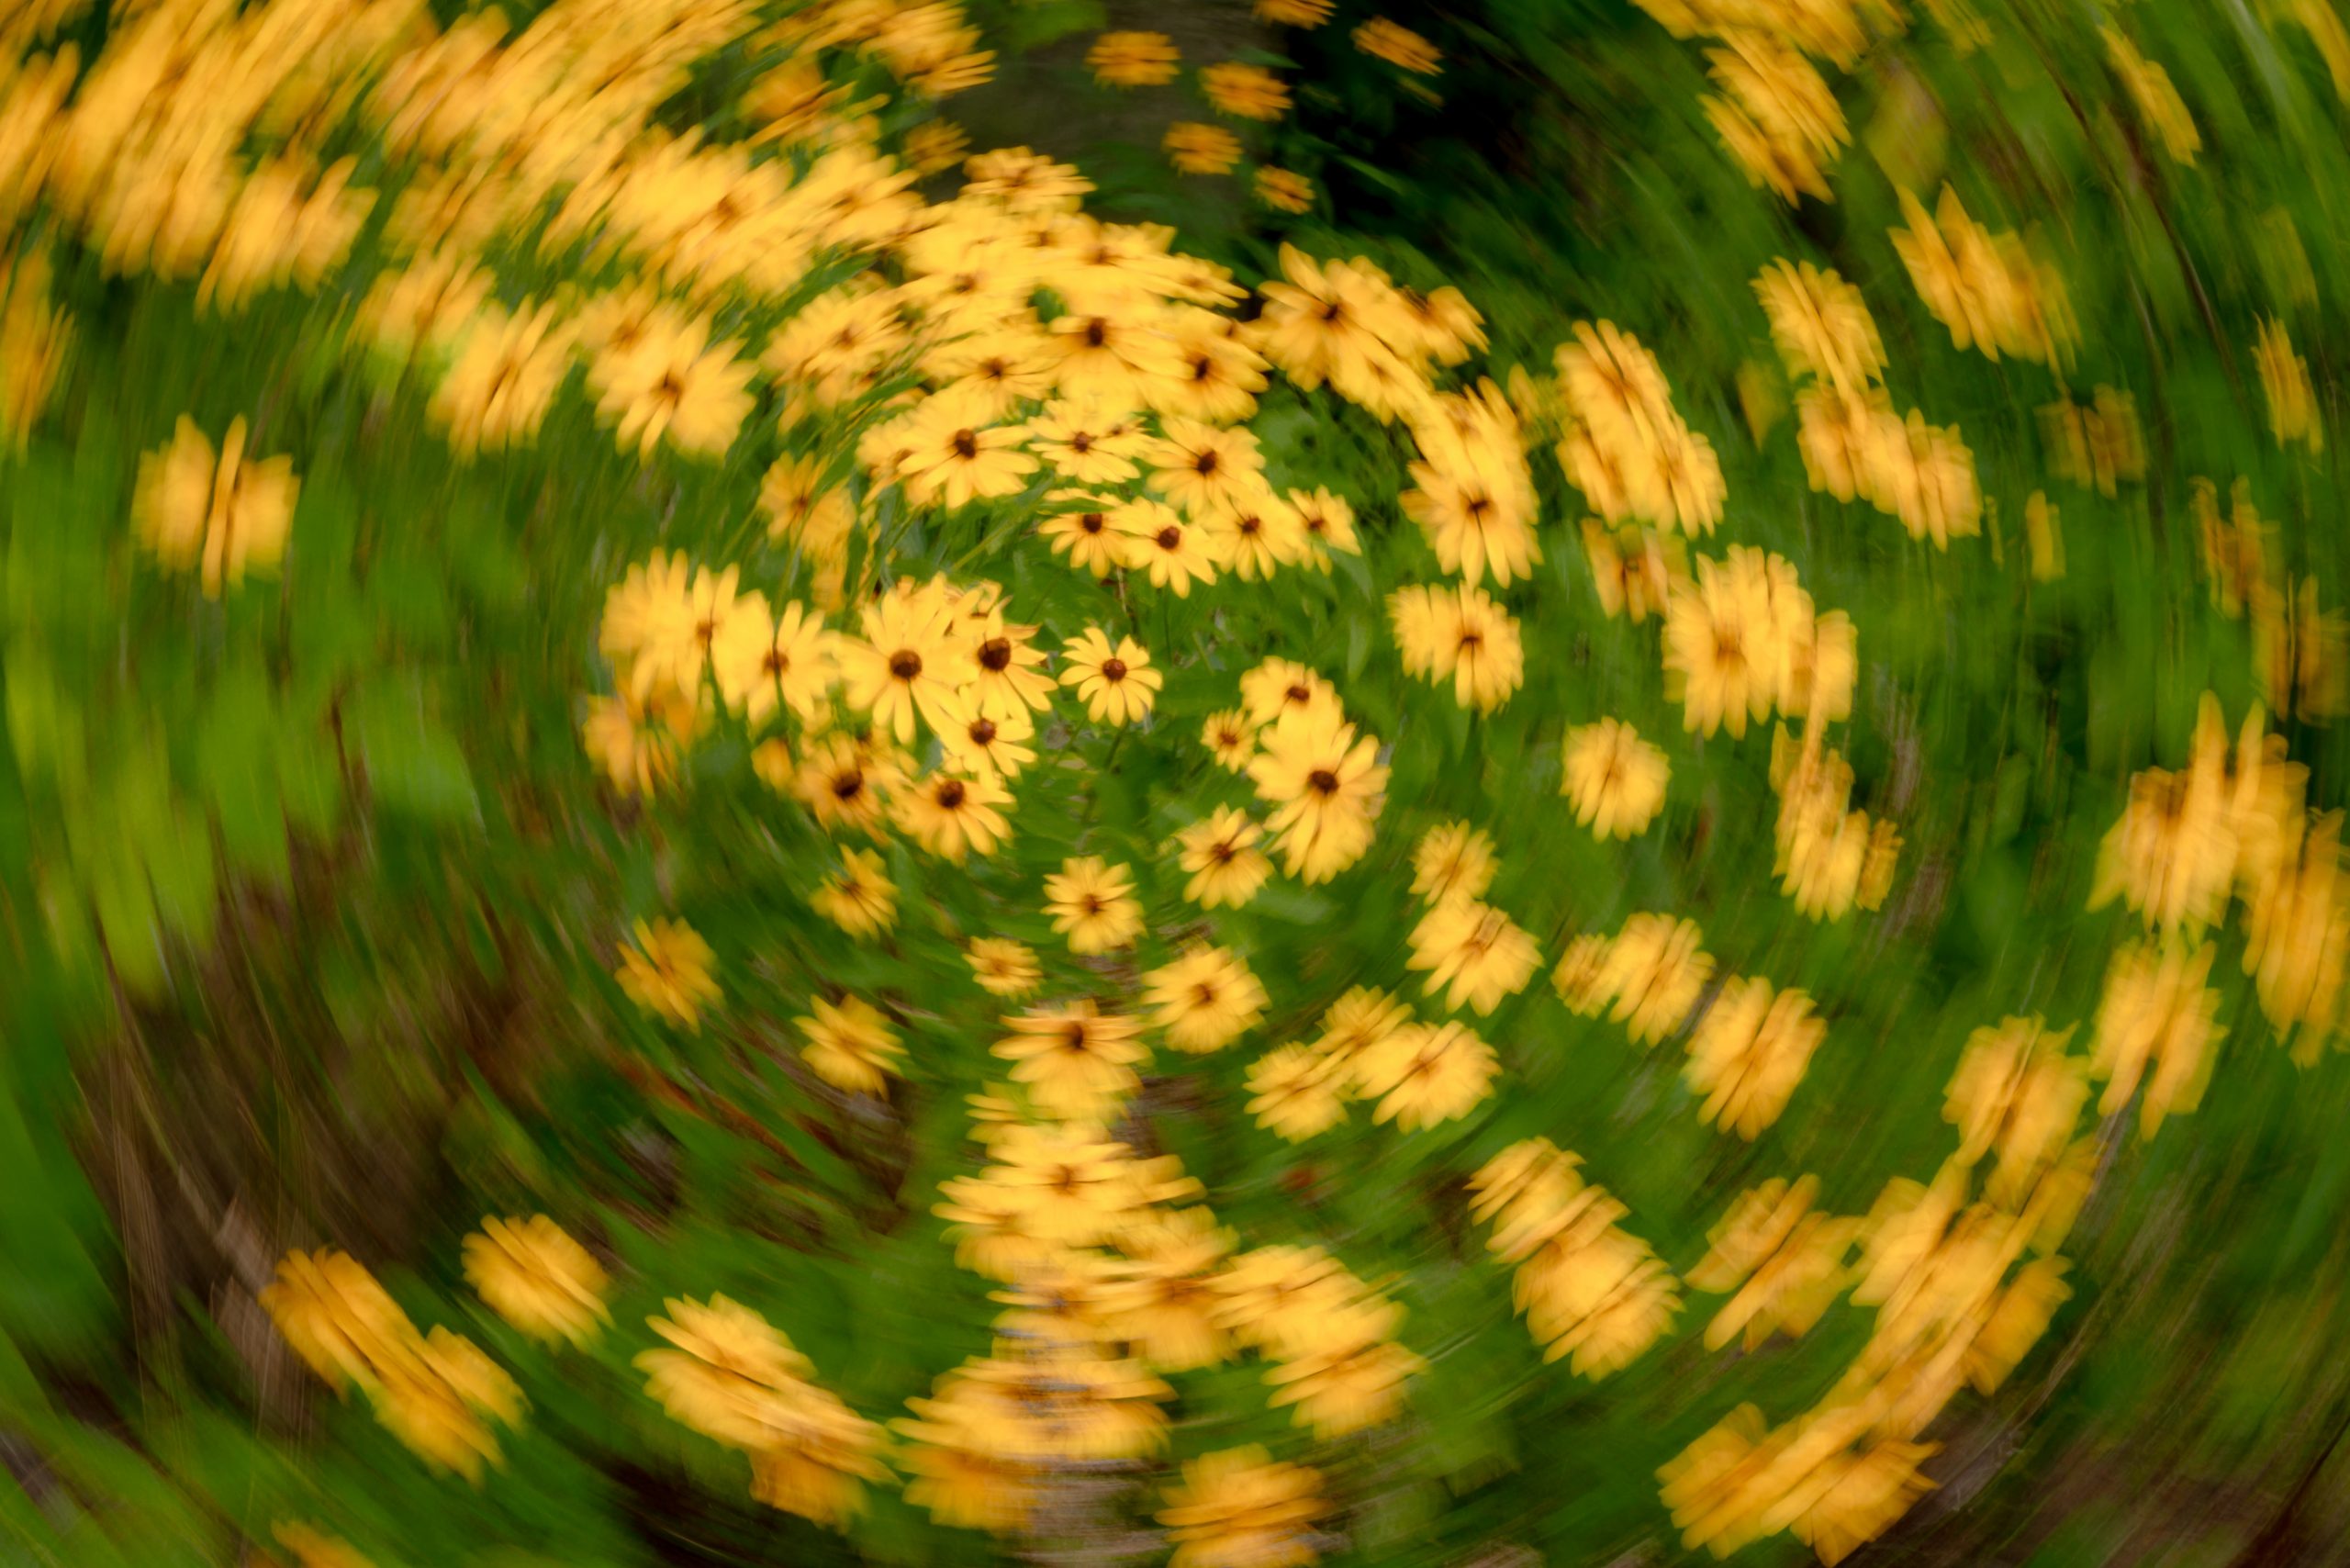 Spinning Daisies